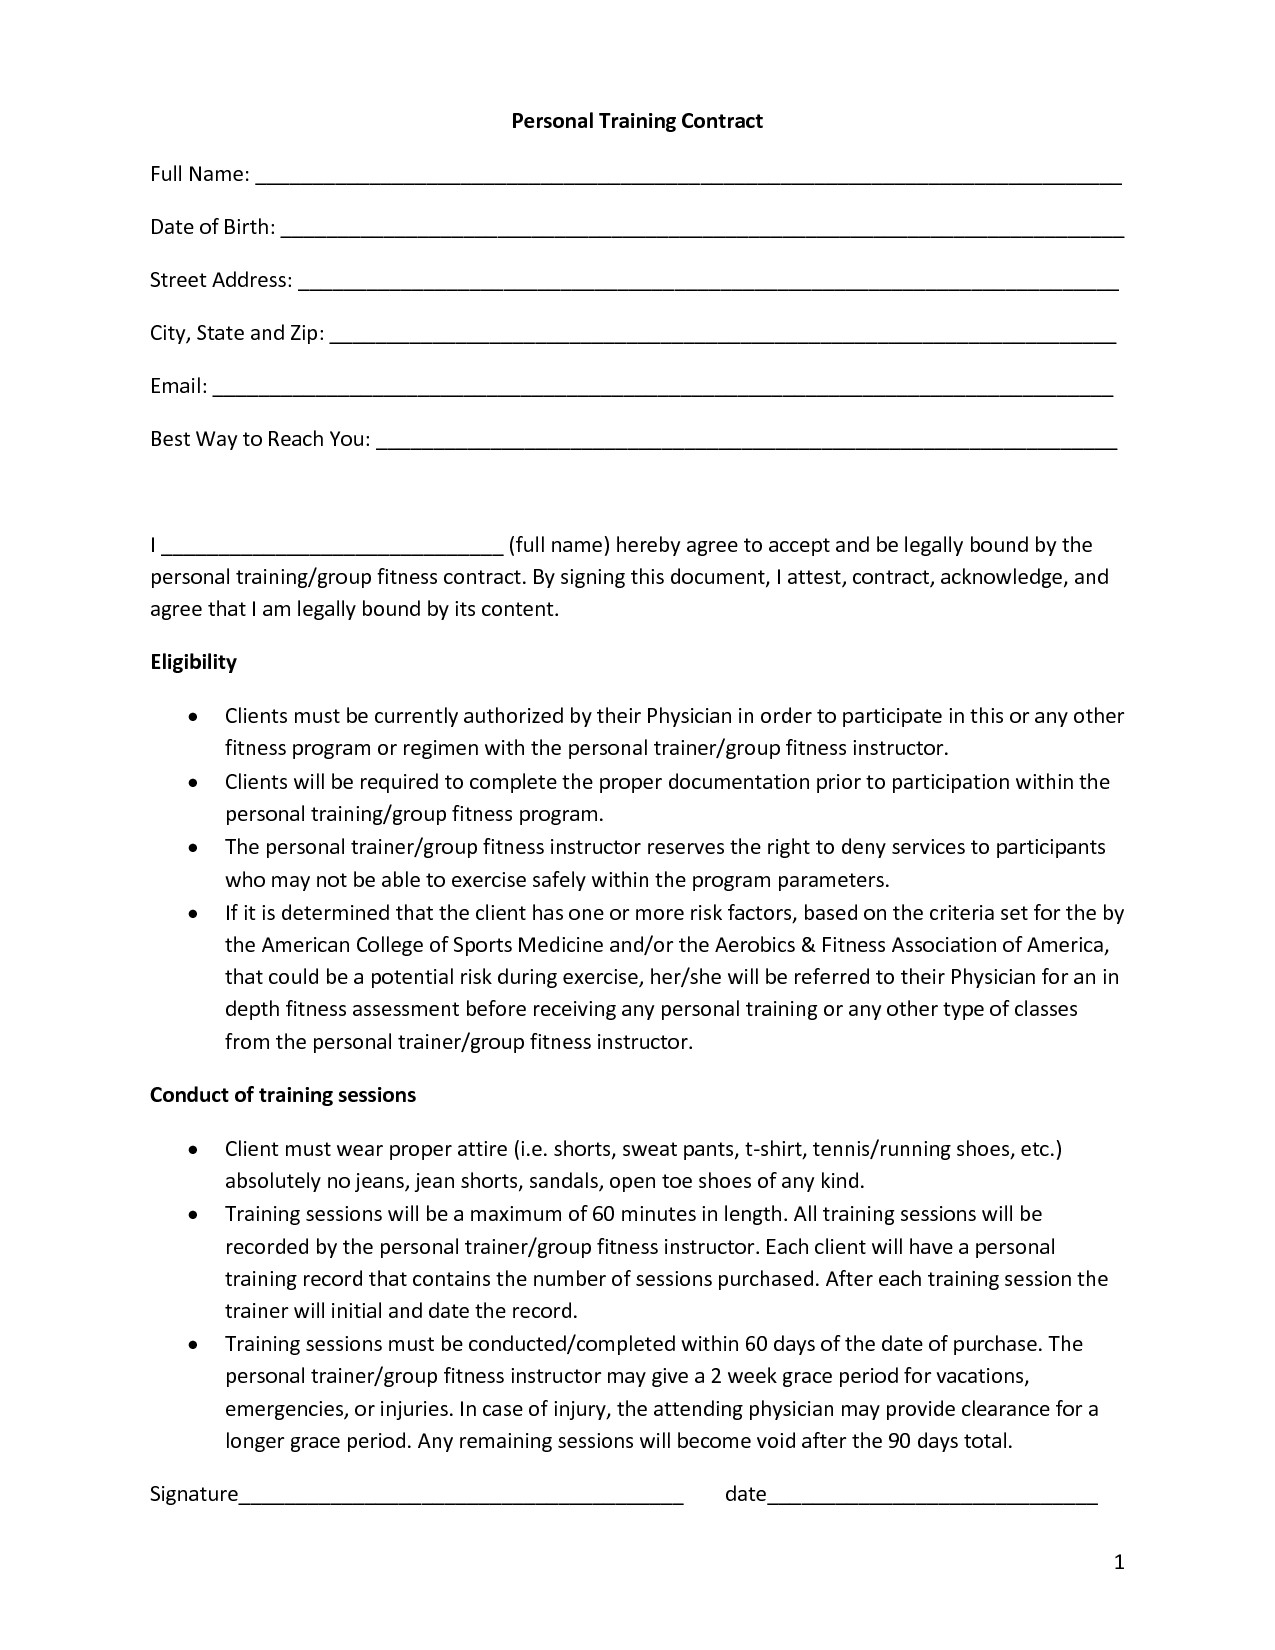 Personal Training Contracts Template Personal Training Contract Template Free Printable Documents